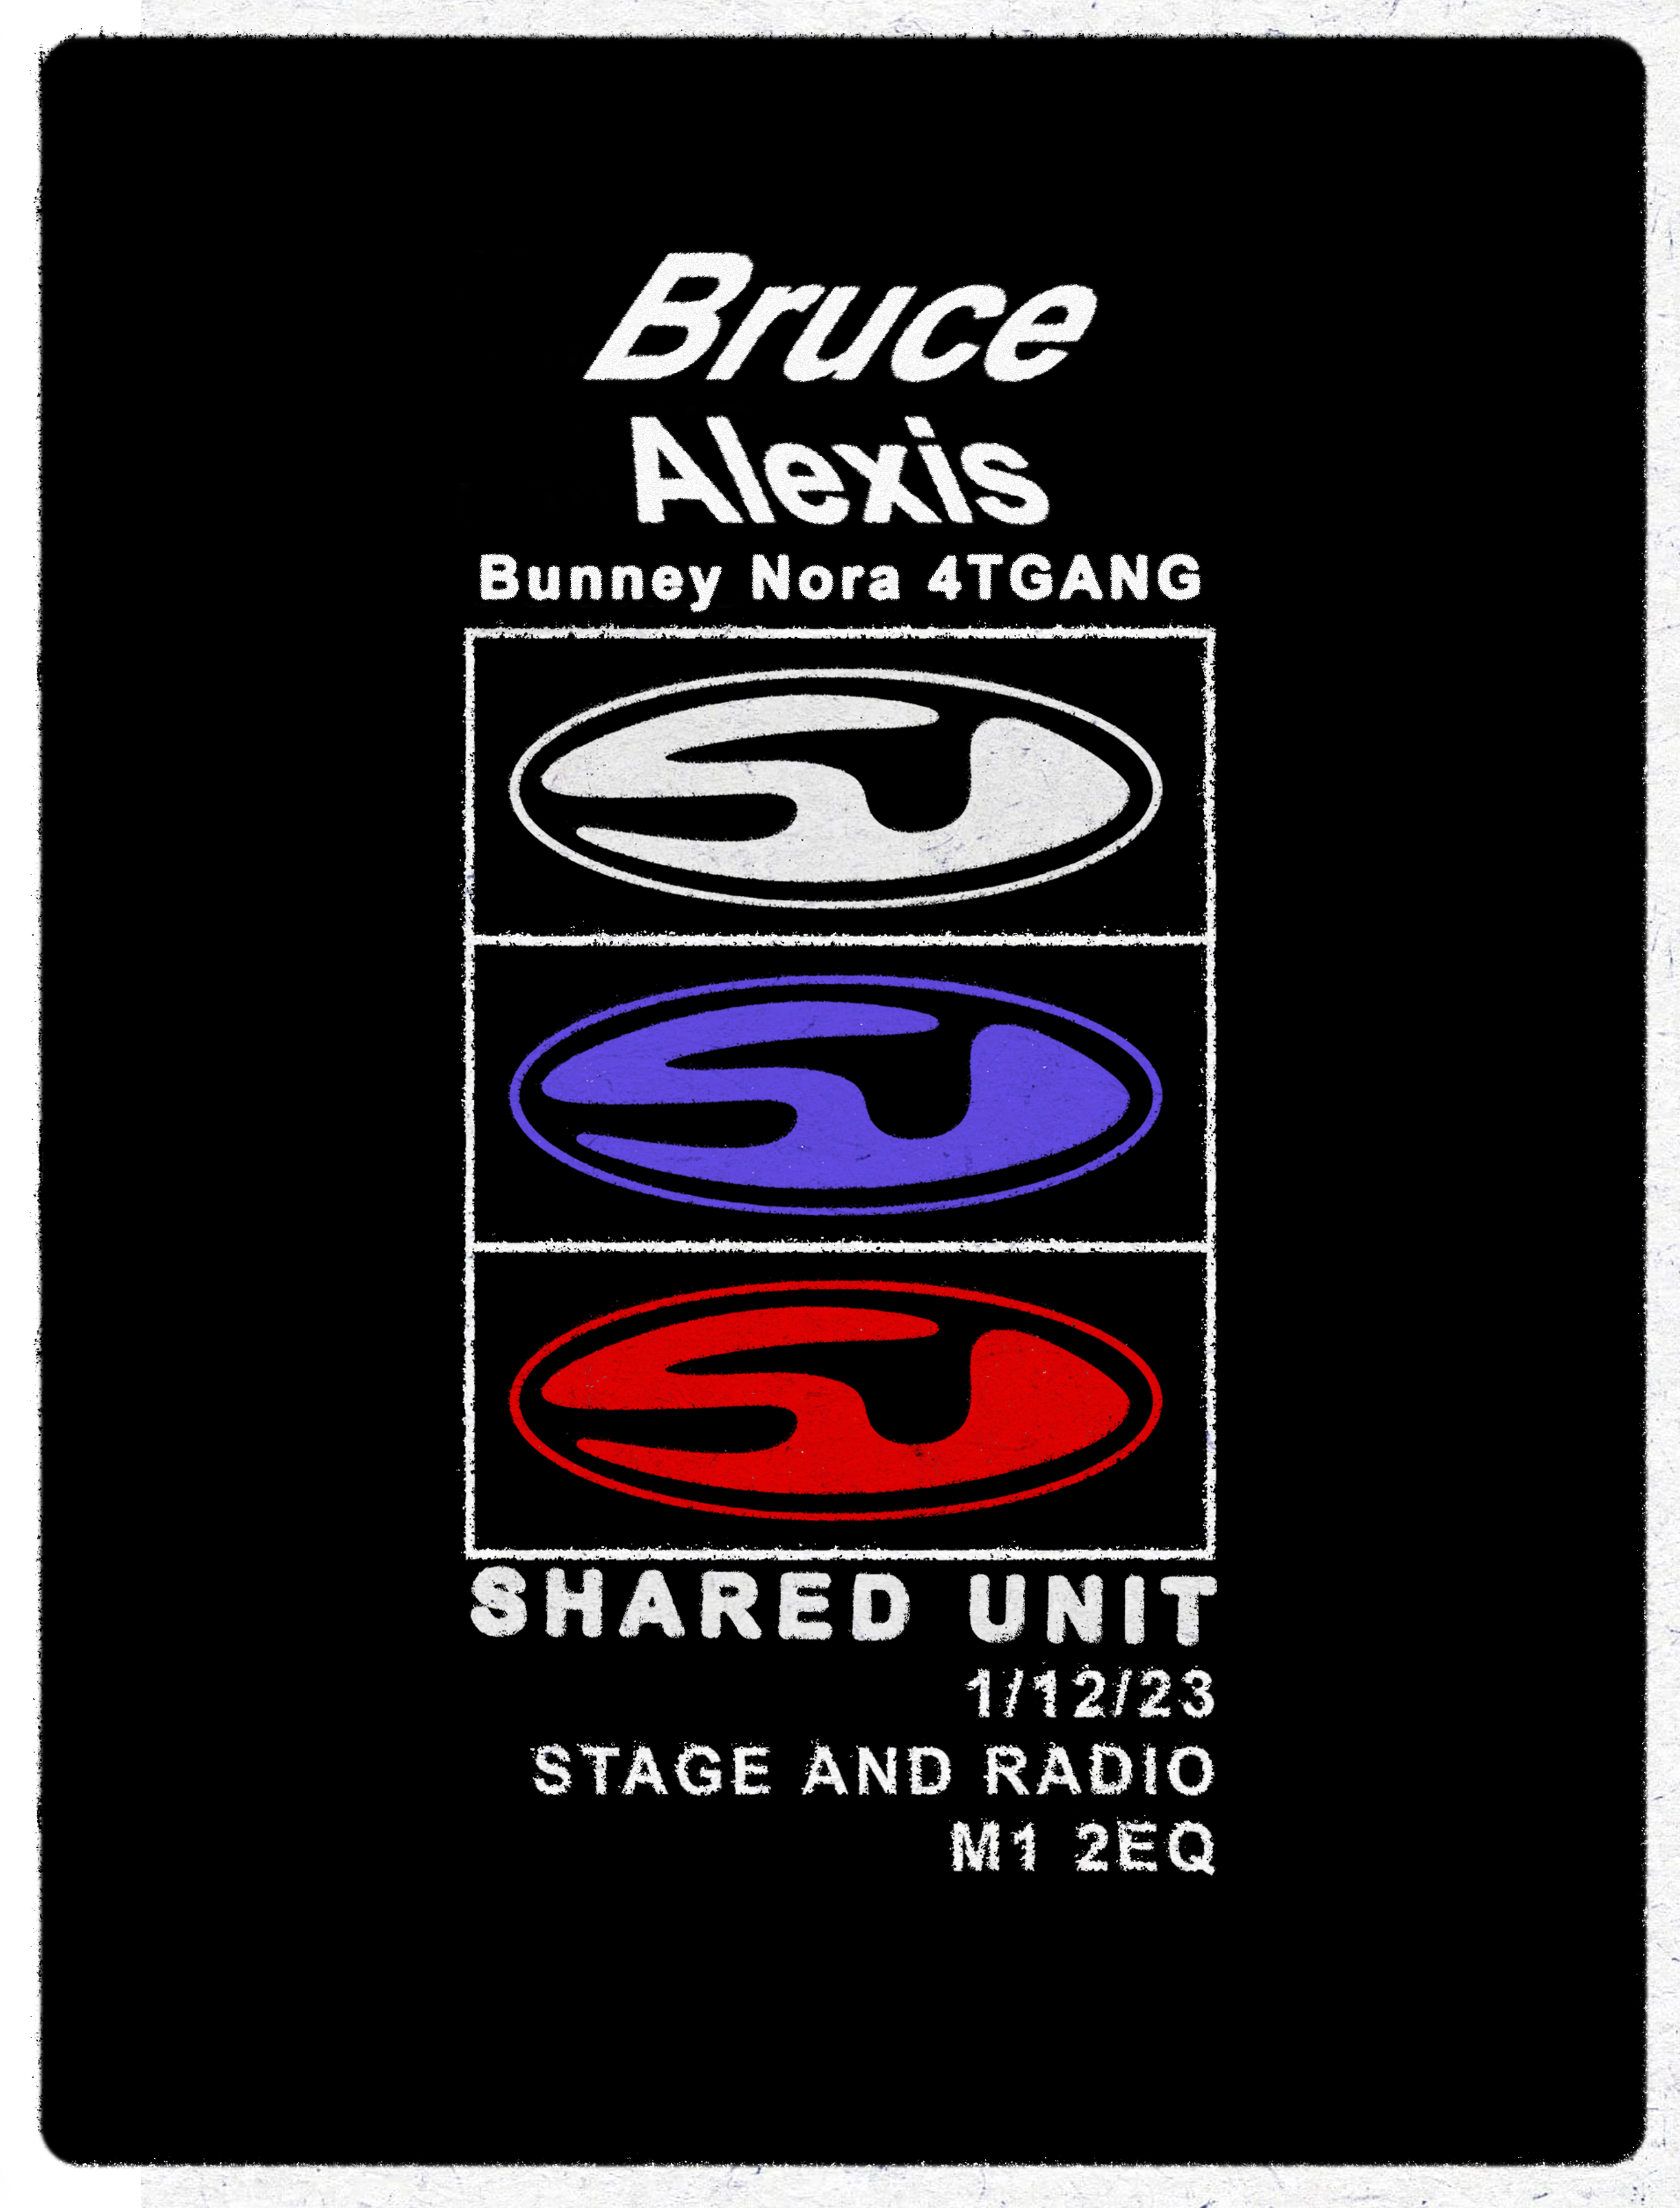 Shared Unit w/ Bruce, Alexis, Bunney, Nora, 4TGANG  - Página frontal